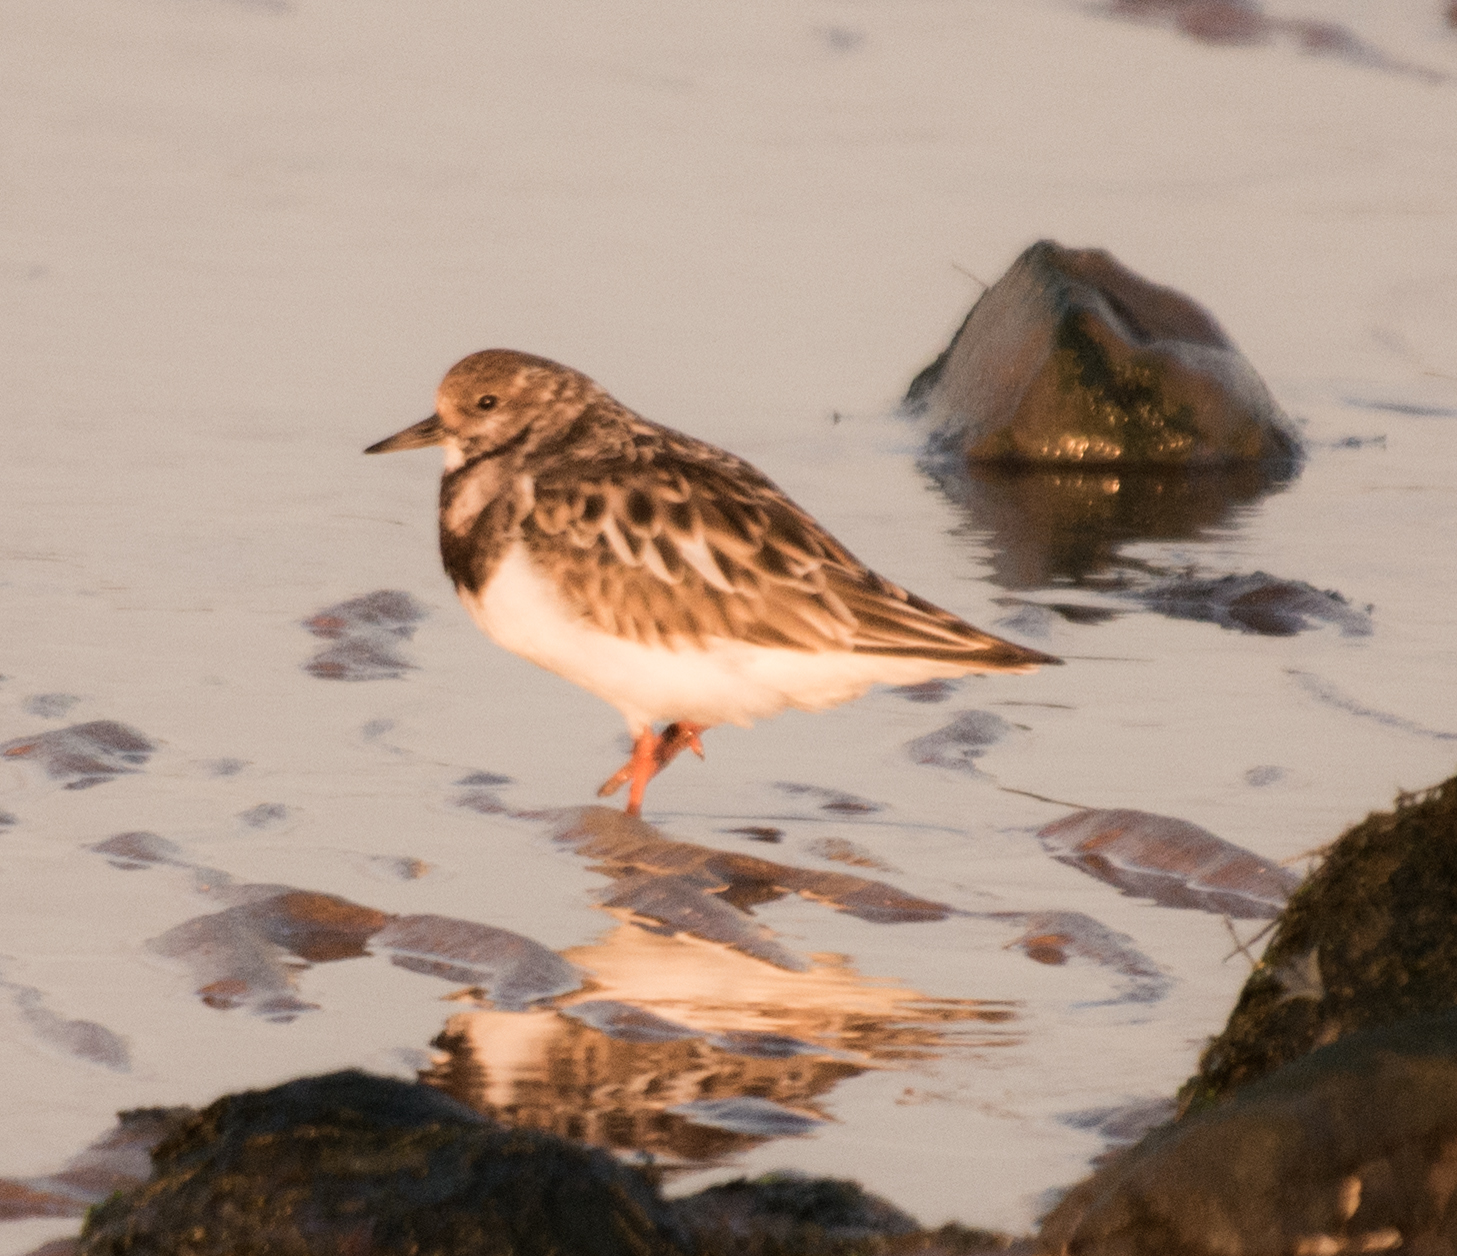 a small brown and white bird is walking in water